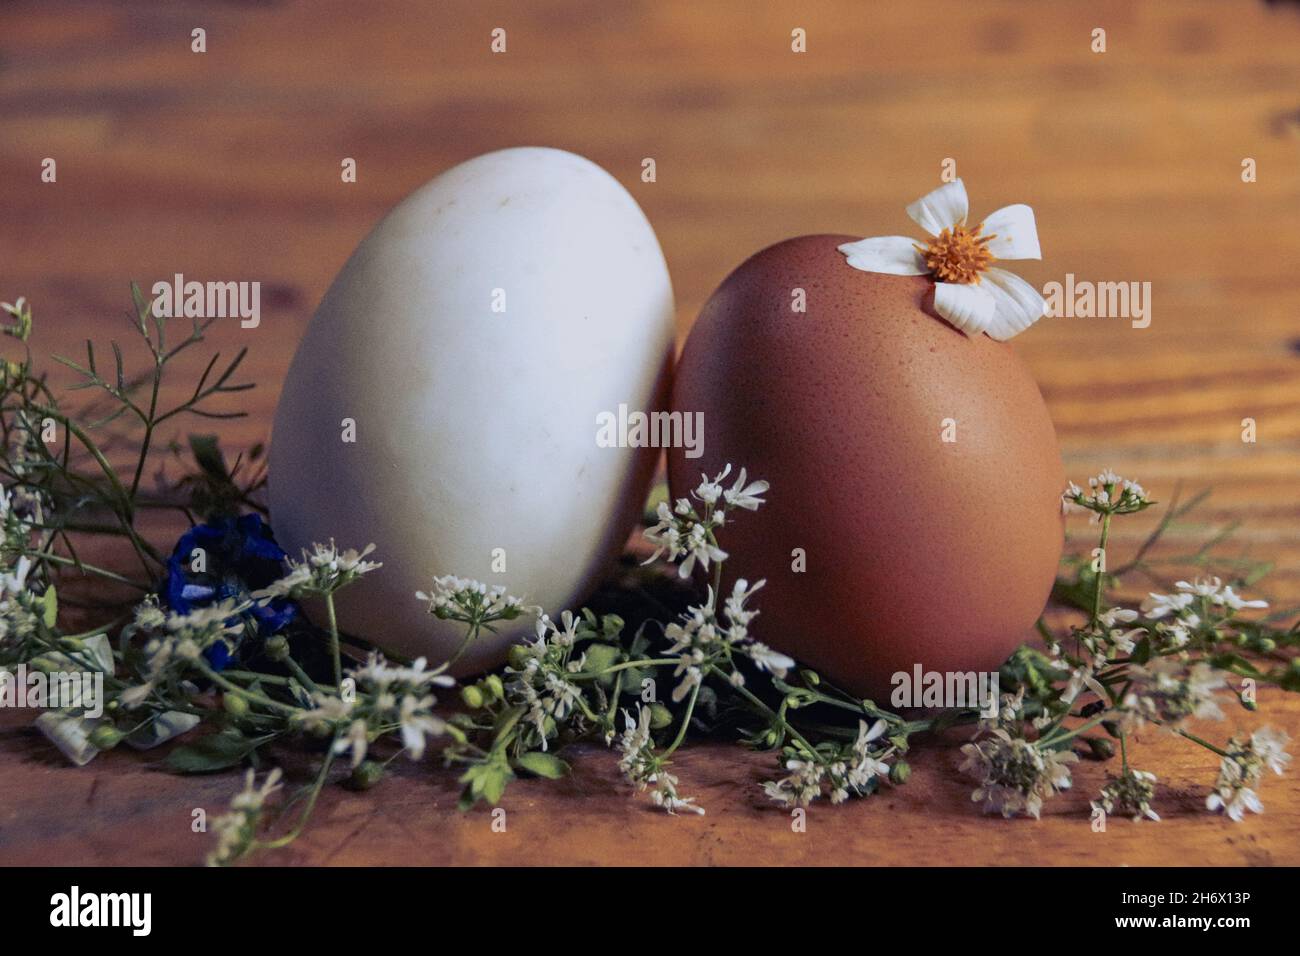 Close up of two Easter eggs in a nest of white dainty flowers Stock Photo